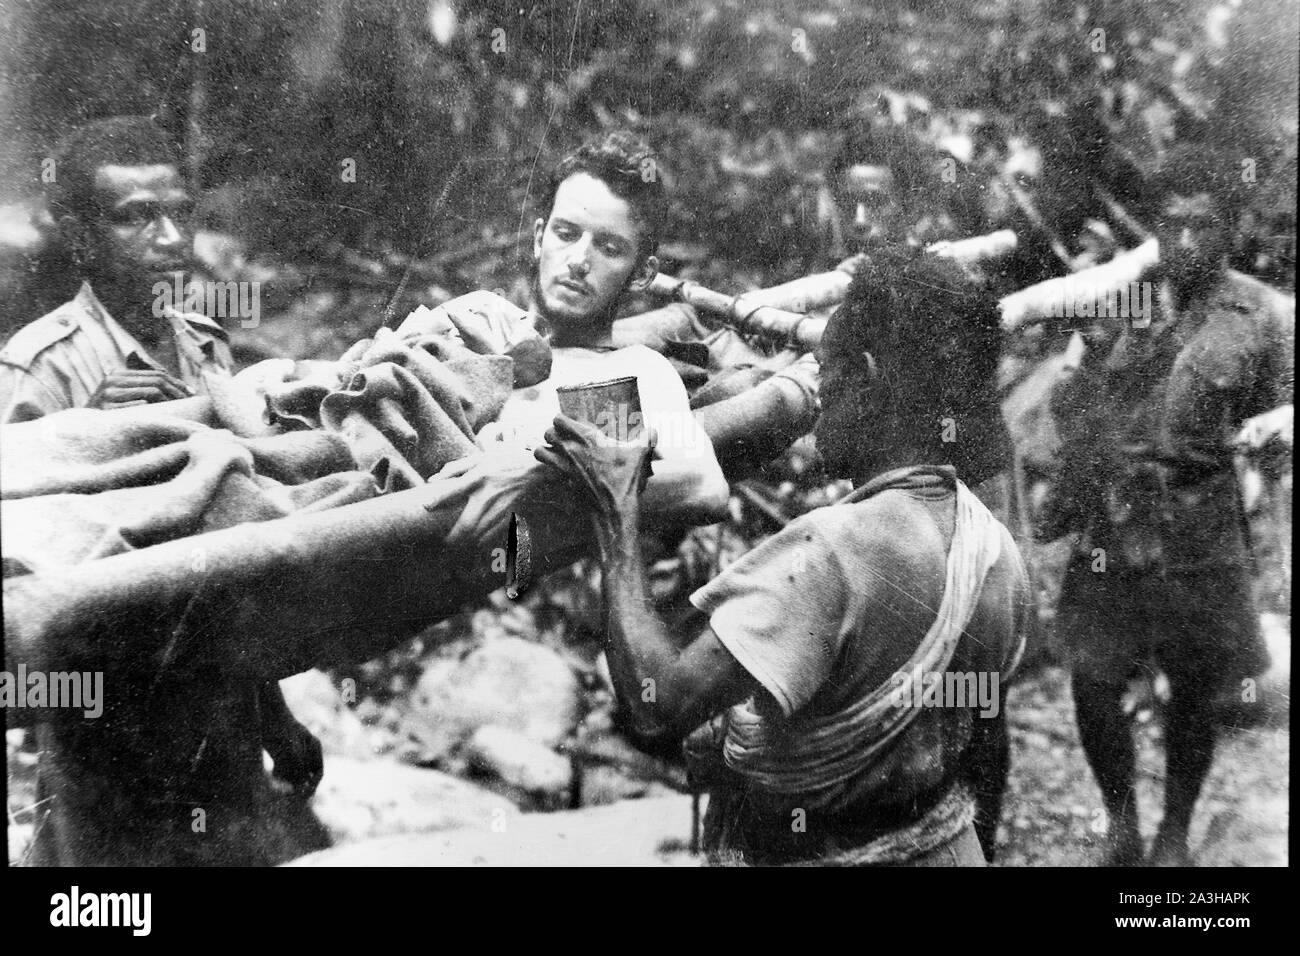 Papua New Guinea, Papua bay, National Capital District, Port Moresby, Owen Corner, Kokoda trail, Second World War pictures presented at the departure of the trail Stock Photo